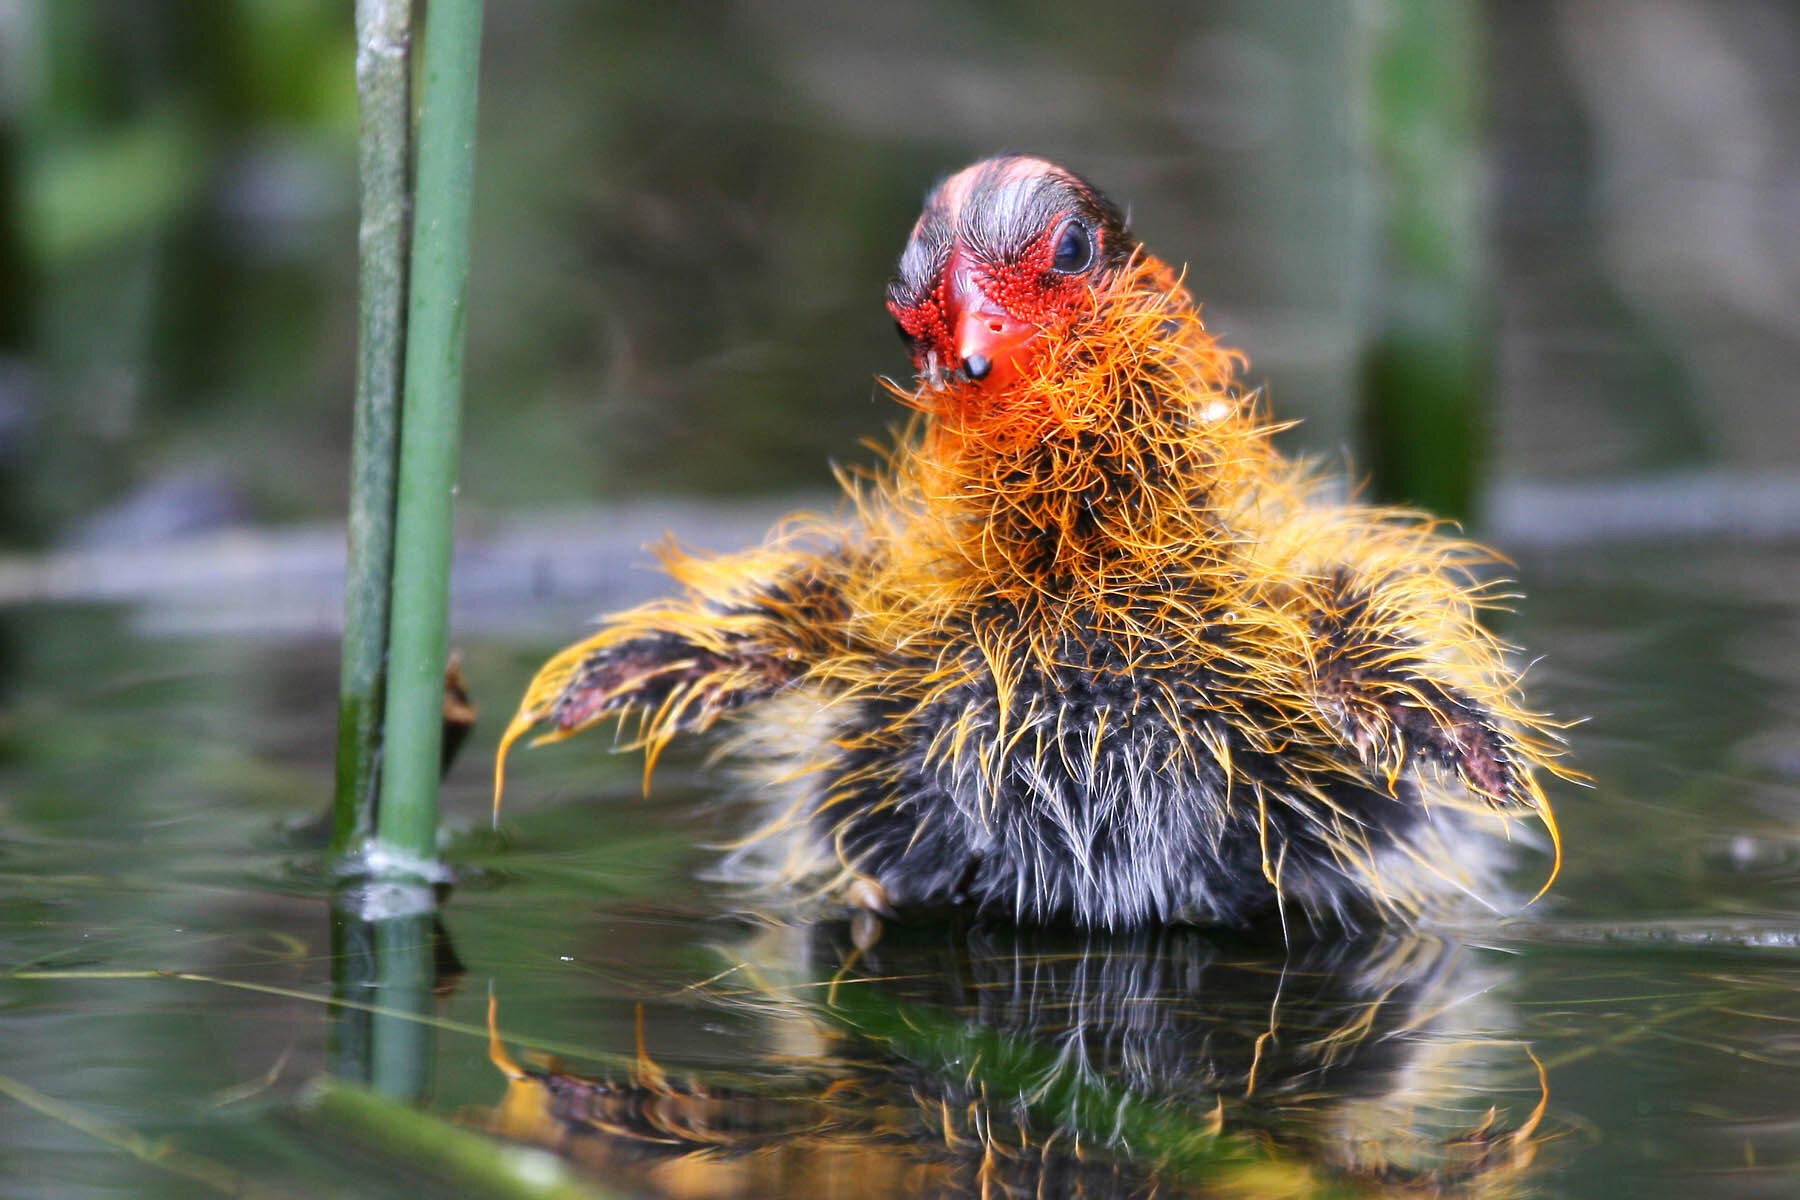 Surprising Explanation to the Mysterious Case of the Ornamented Coot Chicks